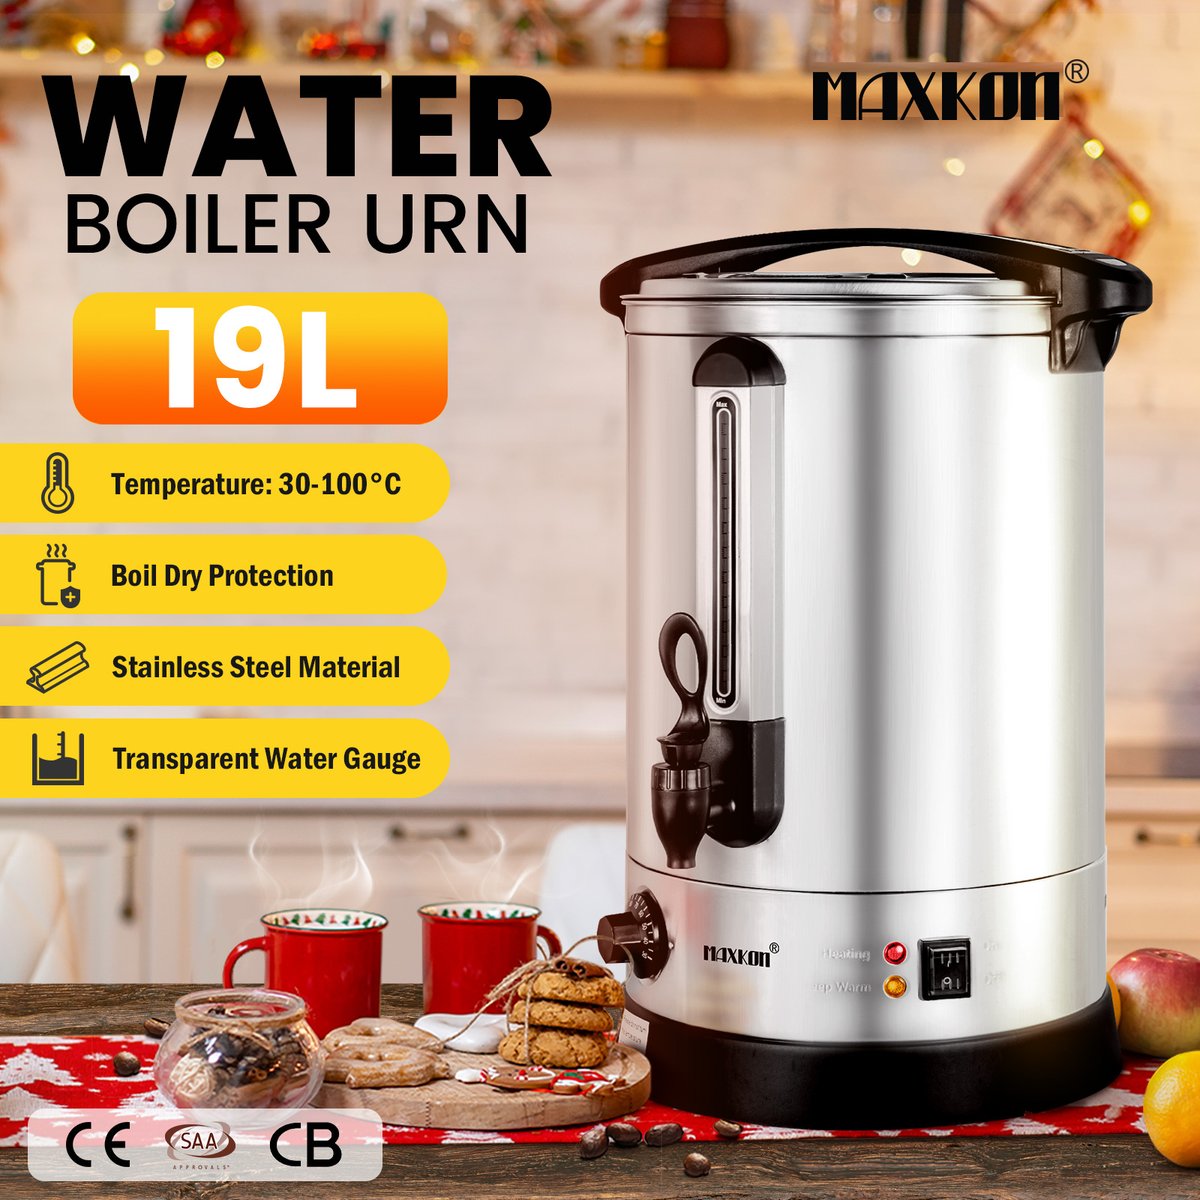 Maxkon 19L Water Dispenser Urn Instant Hot Cold Coffee Maker Machine Tea Kettle Home Commercial Stainless Steel with Tap
bit.ly/4dukOtu
#waterdispenser #urn #instant #hotwater #colddrinks #coffeetime